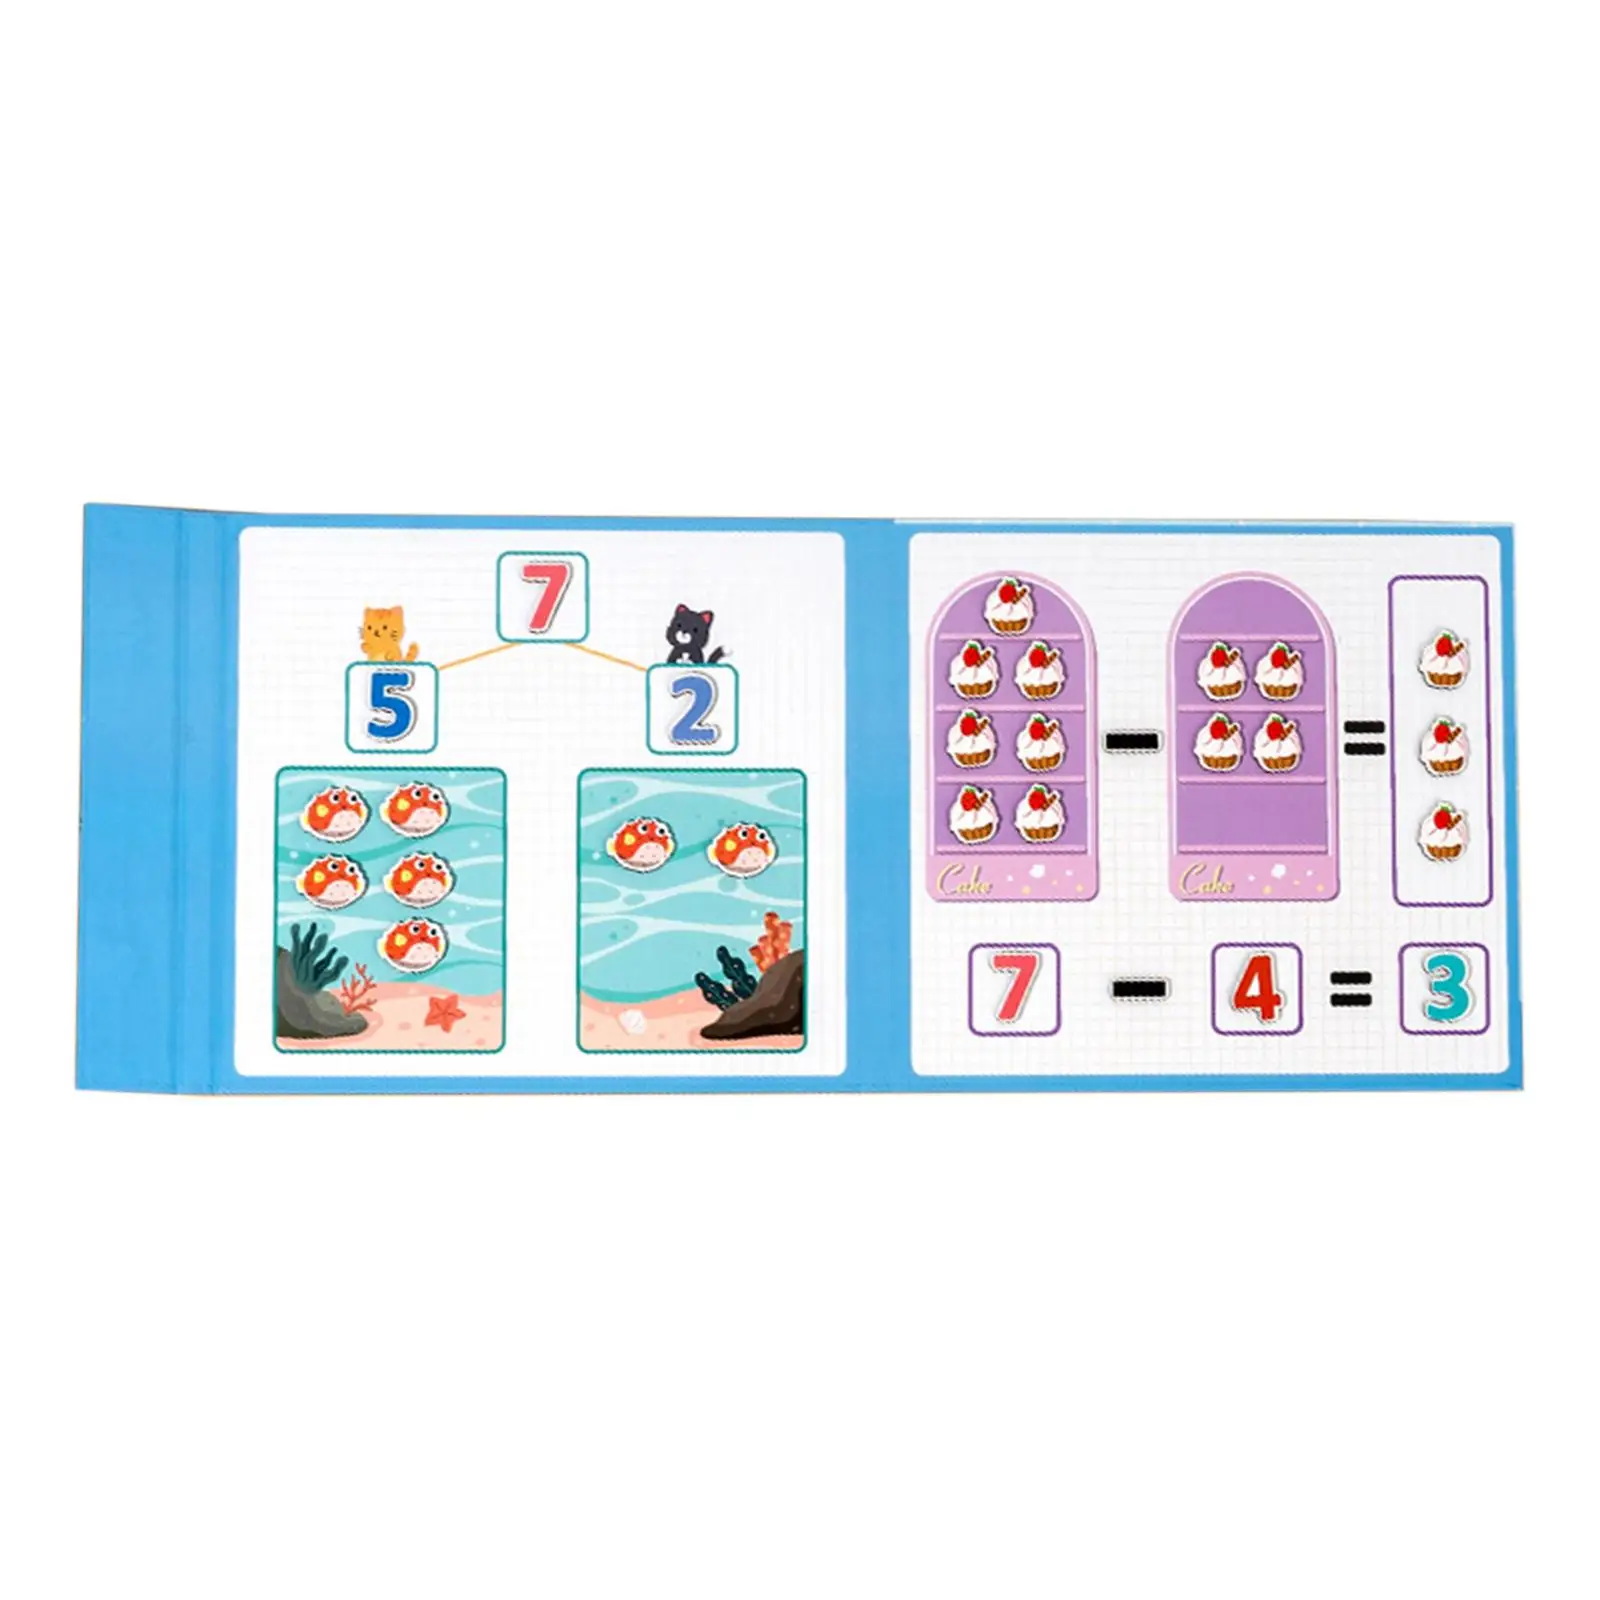 Counting Toy Early Educational Toy Math Games Educational Kids Math Arithmetic Toy for Elementary Children Boy Girls Toddlers